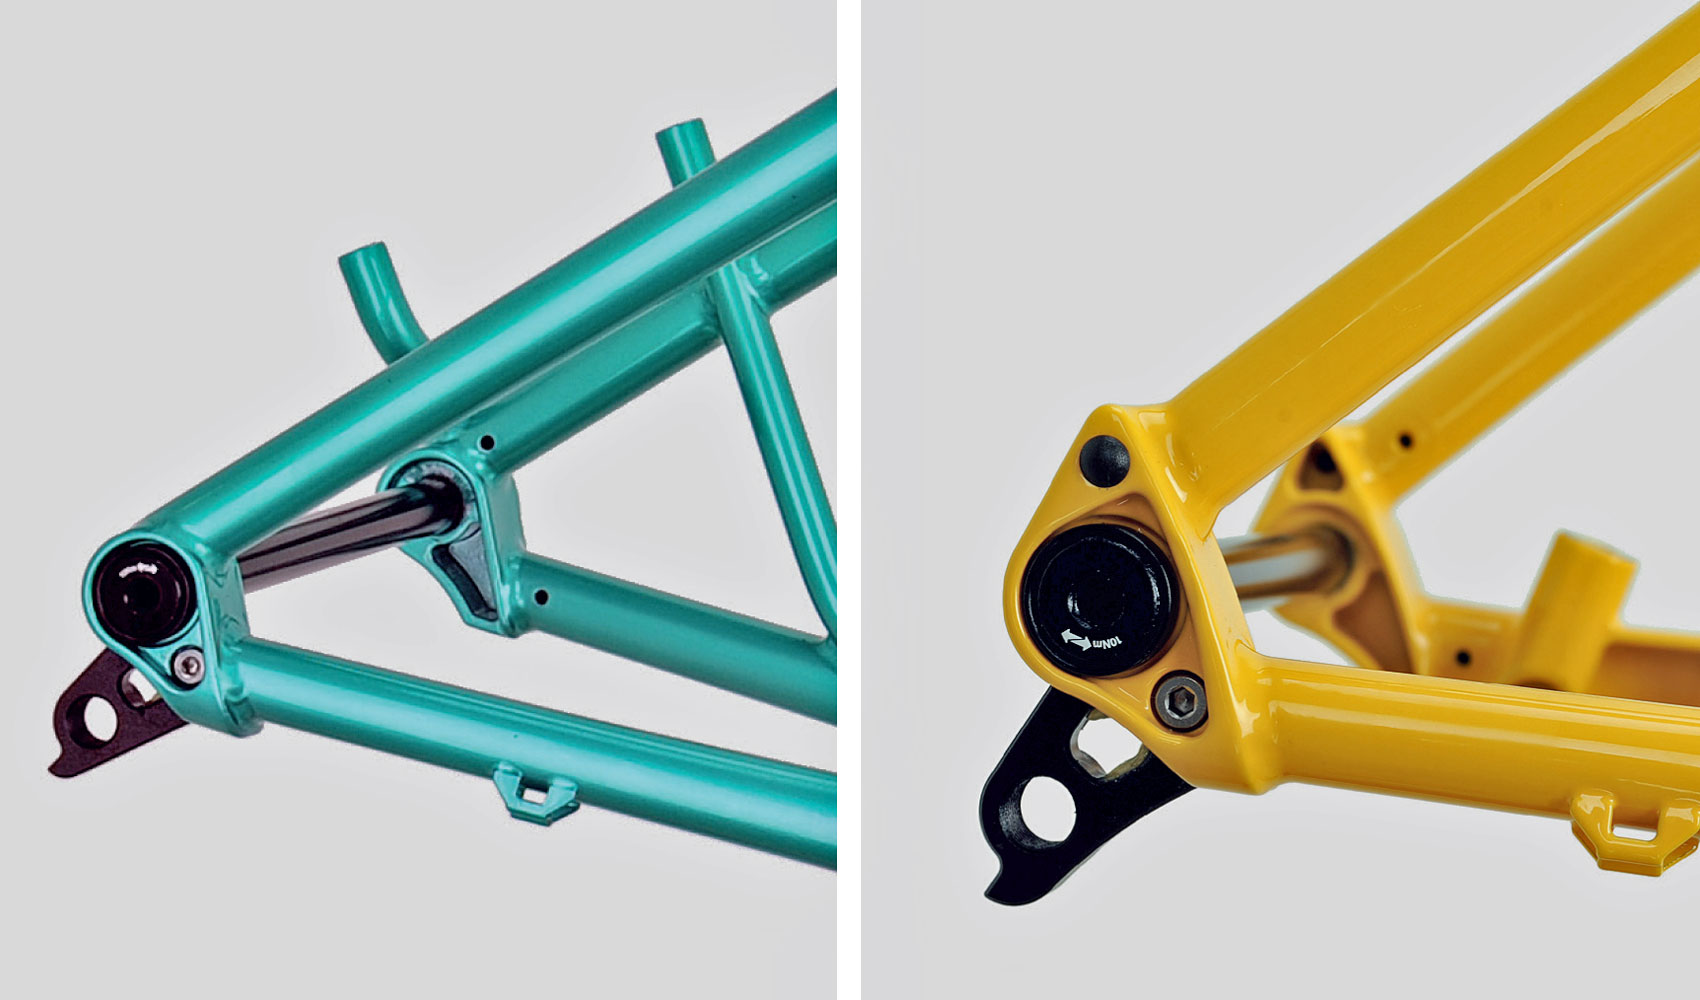 2021 Sour Bikes affordable steel frame updates, new dropouts